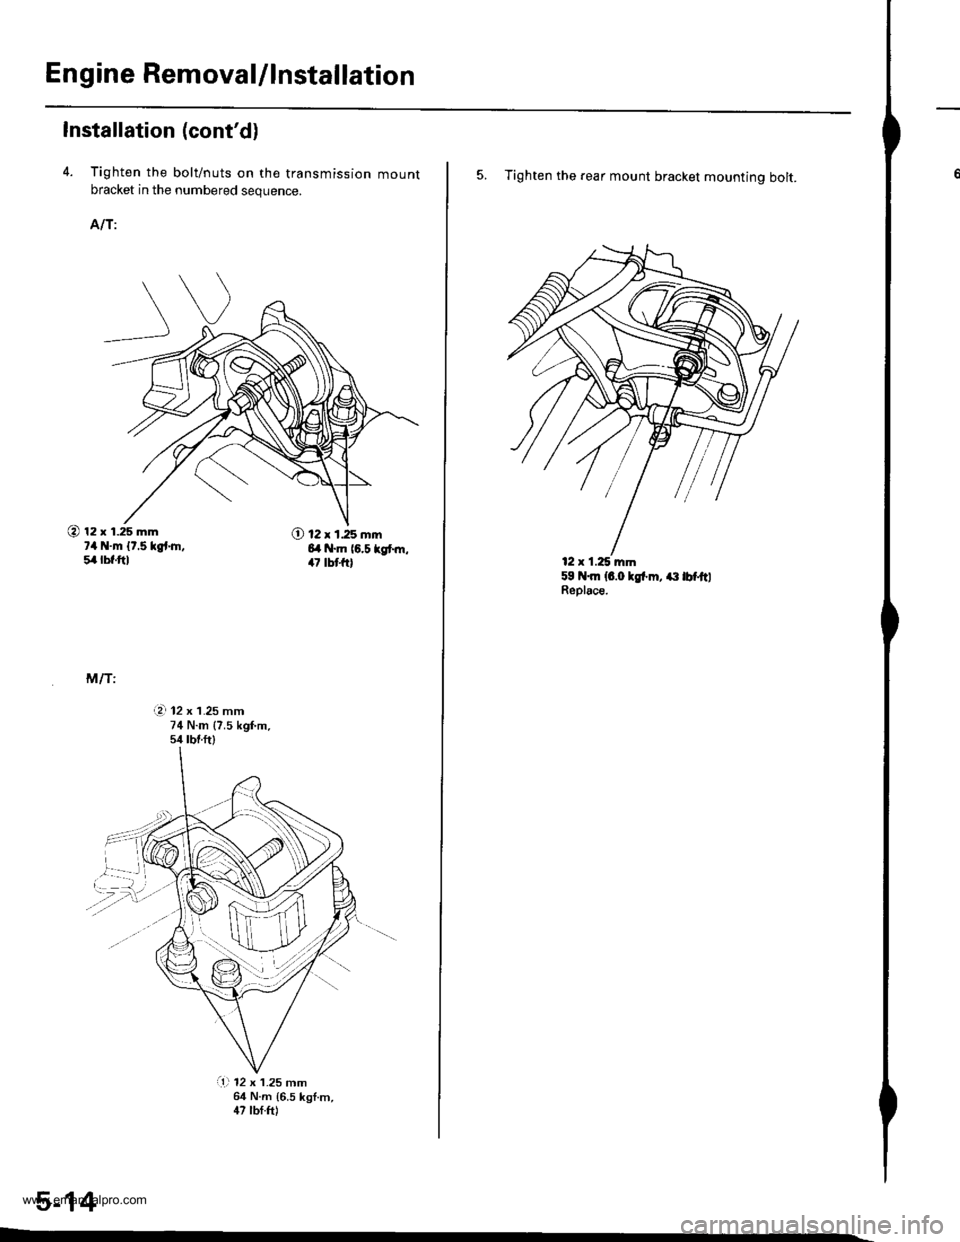 HONDA CR-V 1998 RD1-RD3 / 1.G Workshop Manual 
En gine RemovaUlnstallation
Installation (contd)
4. Tighten the bolt/nuts on the transmission mountbracket in the numbered sequence.
AIT:
@ 12 x 1.25 mm?4 N.m {t.5 kgt.h,5,4lbf.ftl
O 12 x 1.25 mm6l 